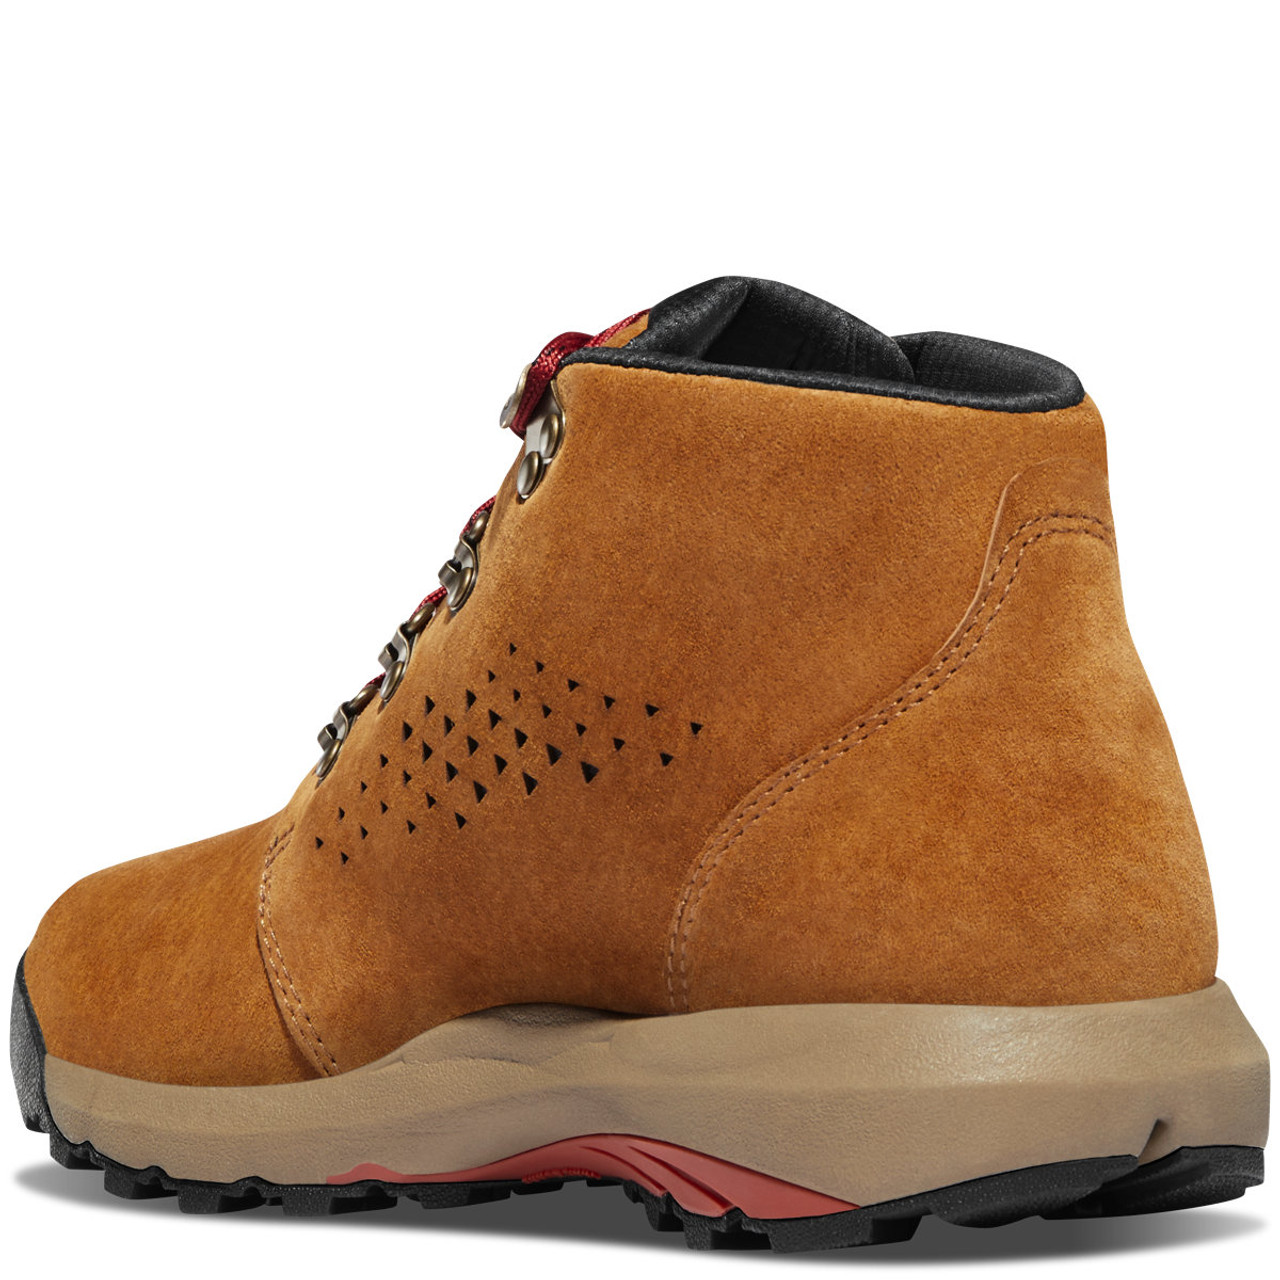 DANNER® INQUIRE CHUKKA WOMEN'S SIZING BROWN/RED LIFESTYLE BOOTS 64500